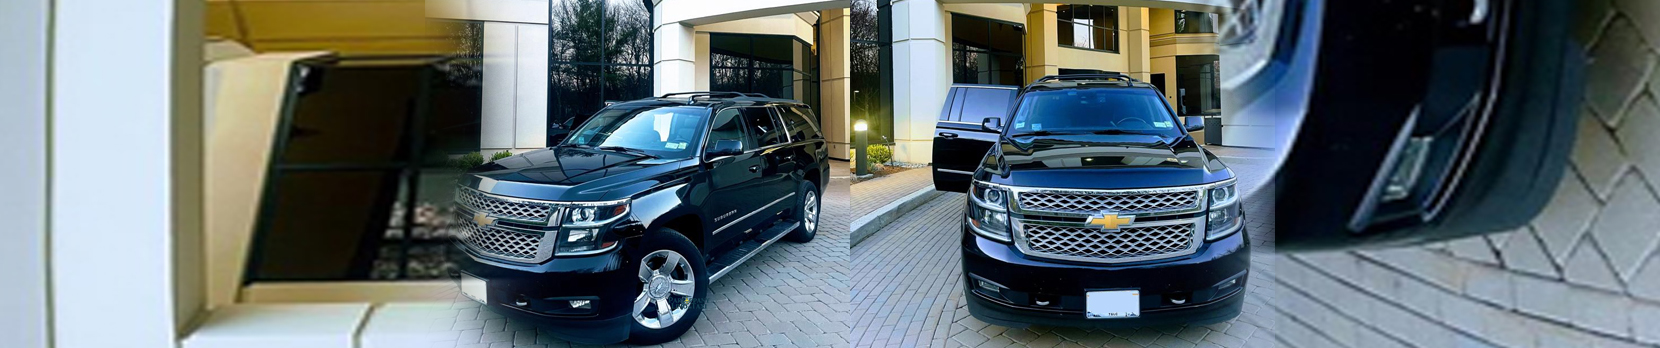 JFK Airport Limo Taxi Service